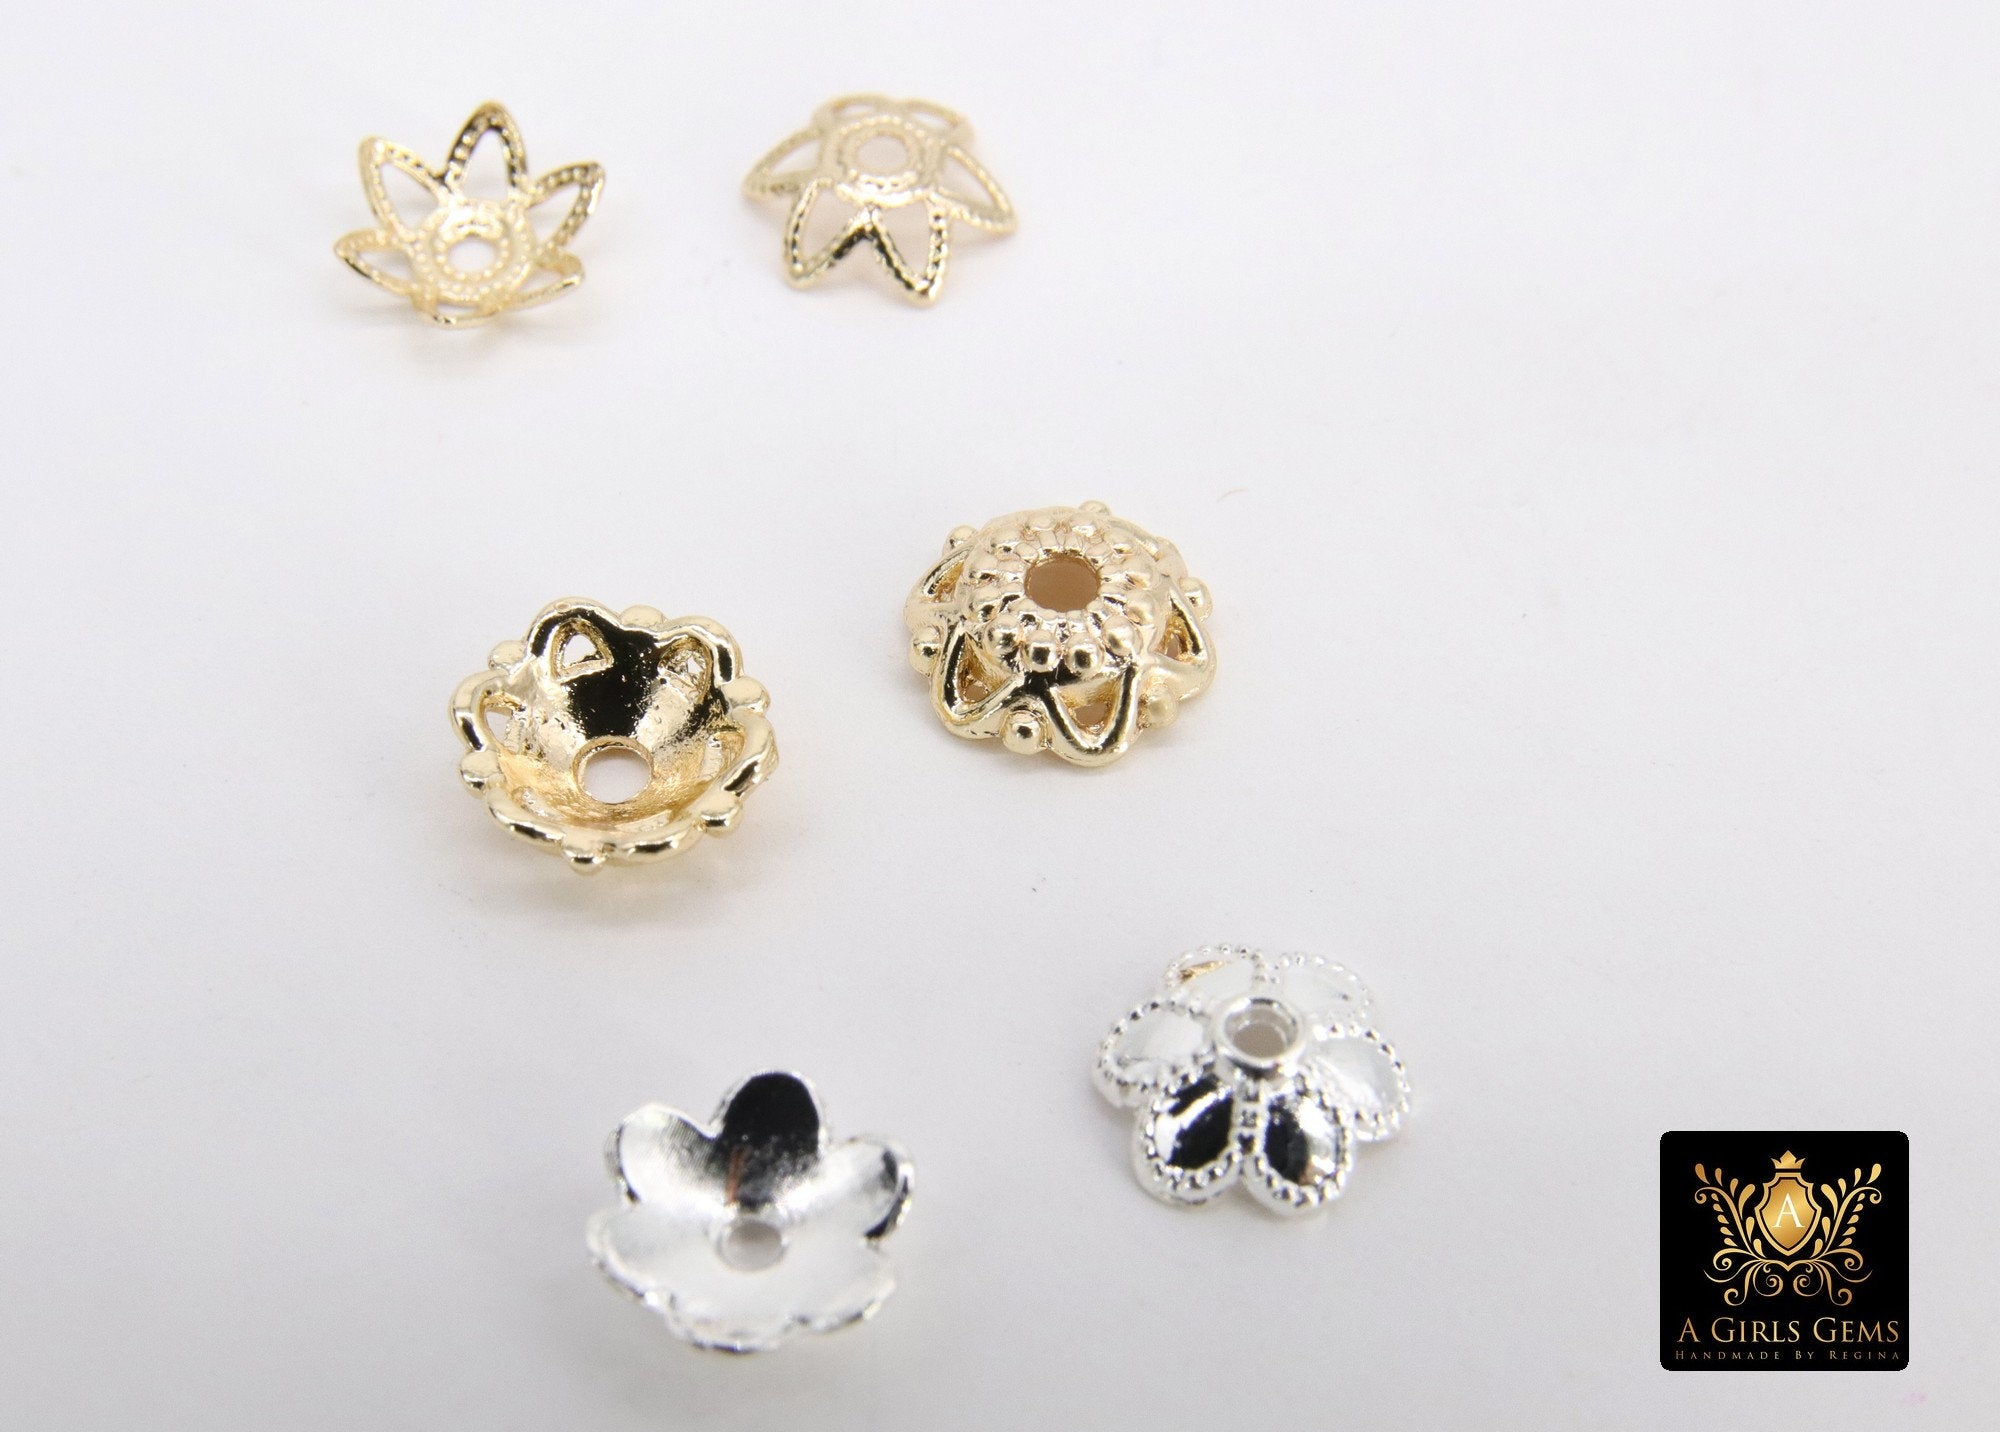 Gold Bead Caps, 8 mm Silver Bead End Caps Styles #3415, Round Petal Star Discs, High Quality Smooth Plating, Jewelry Findings